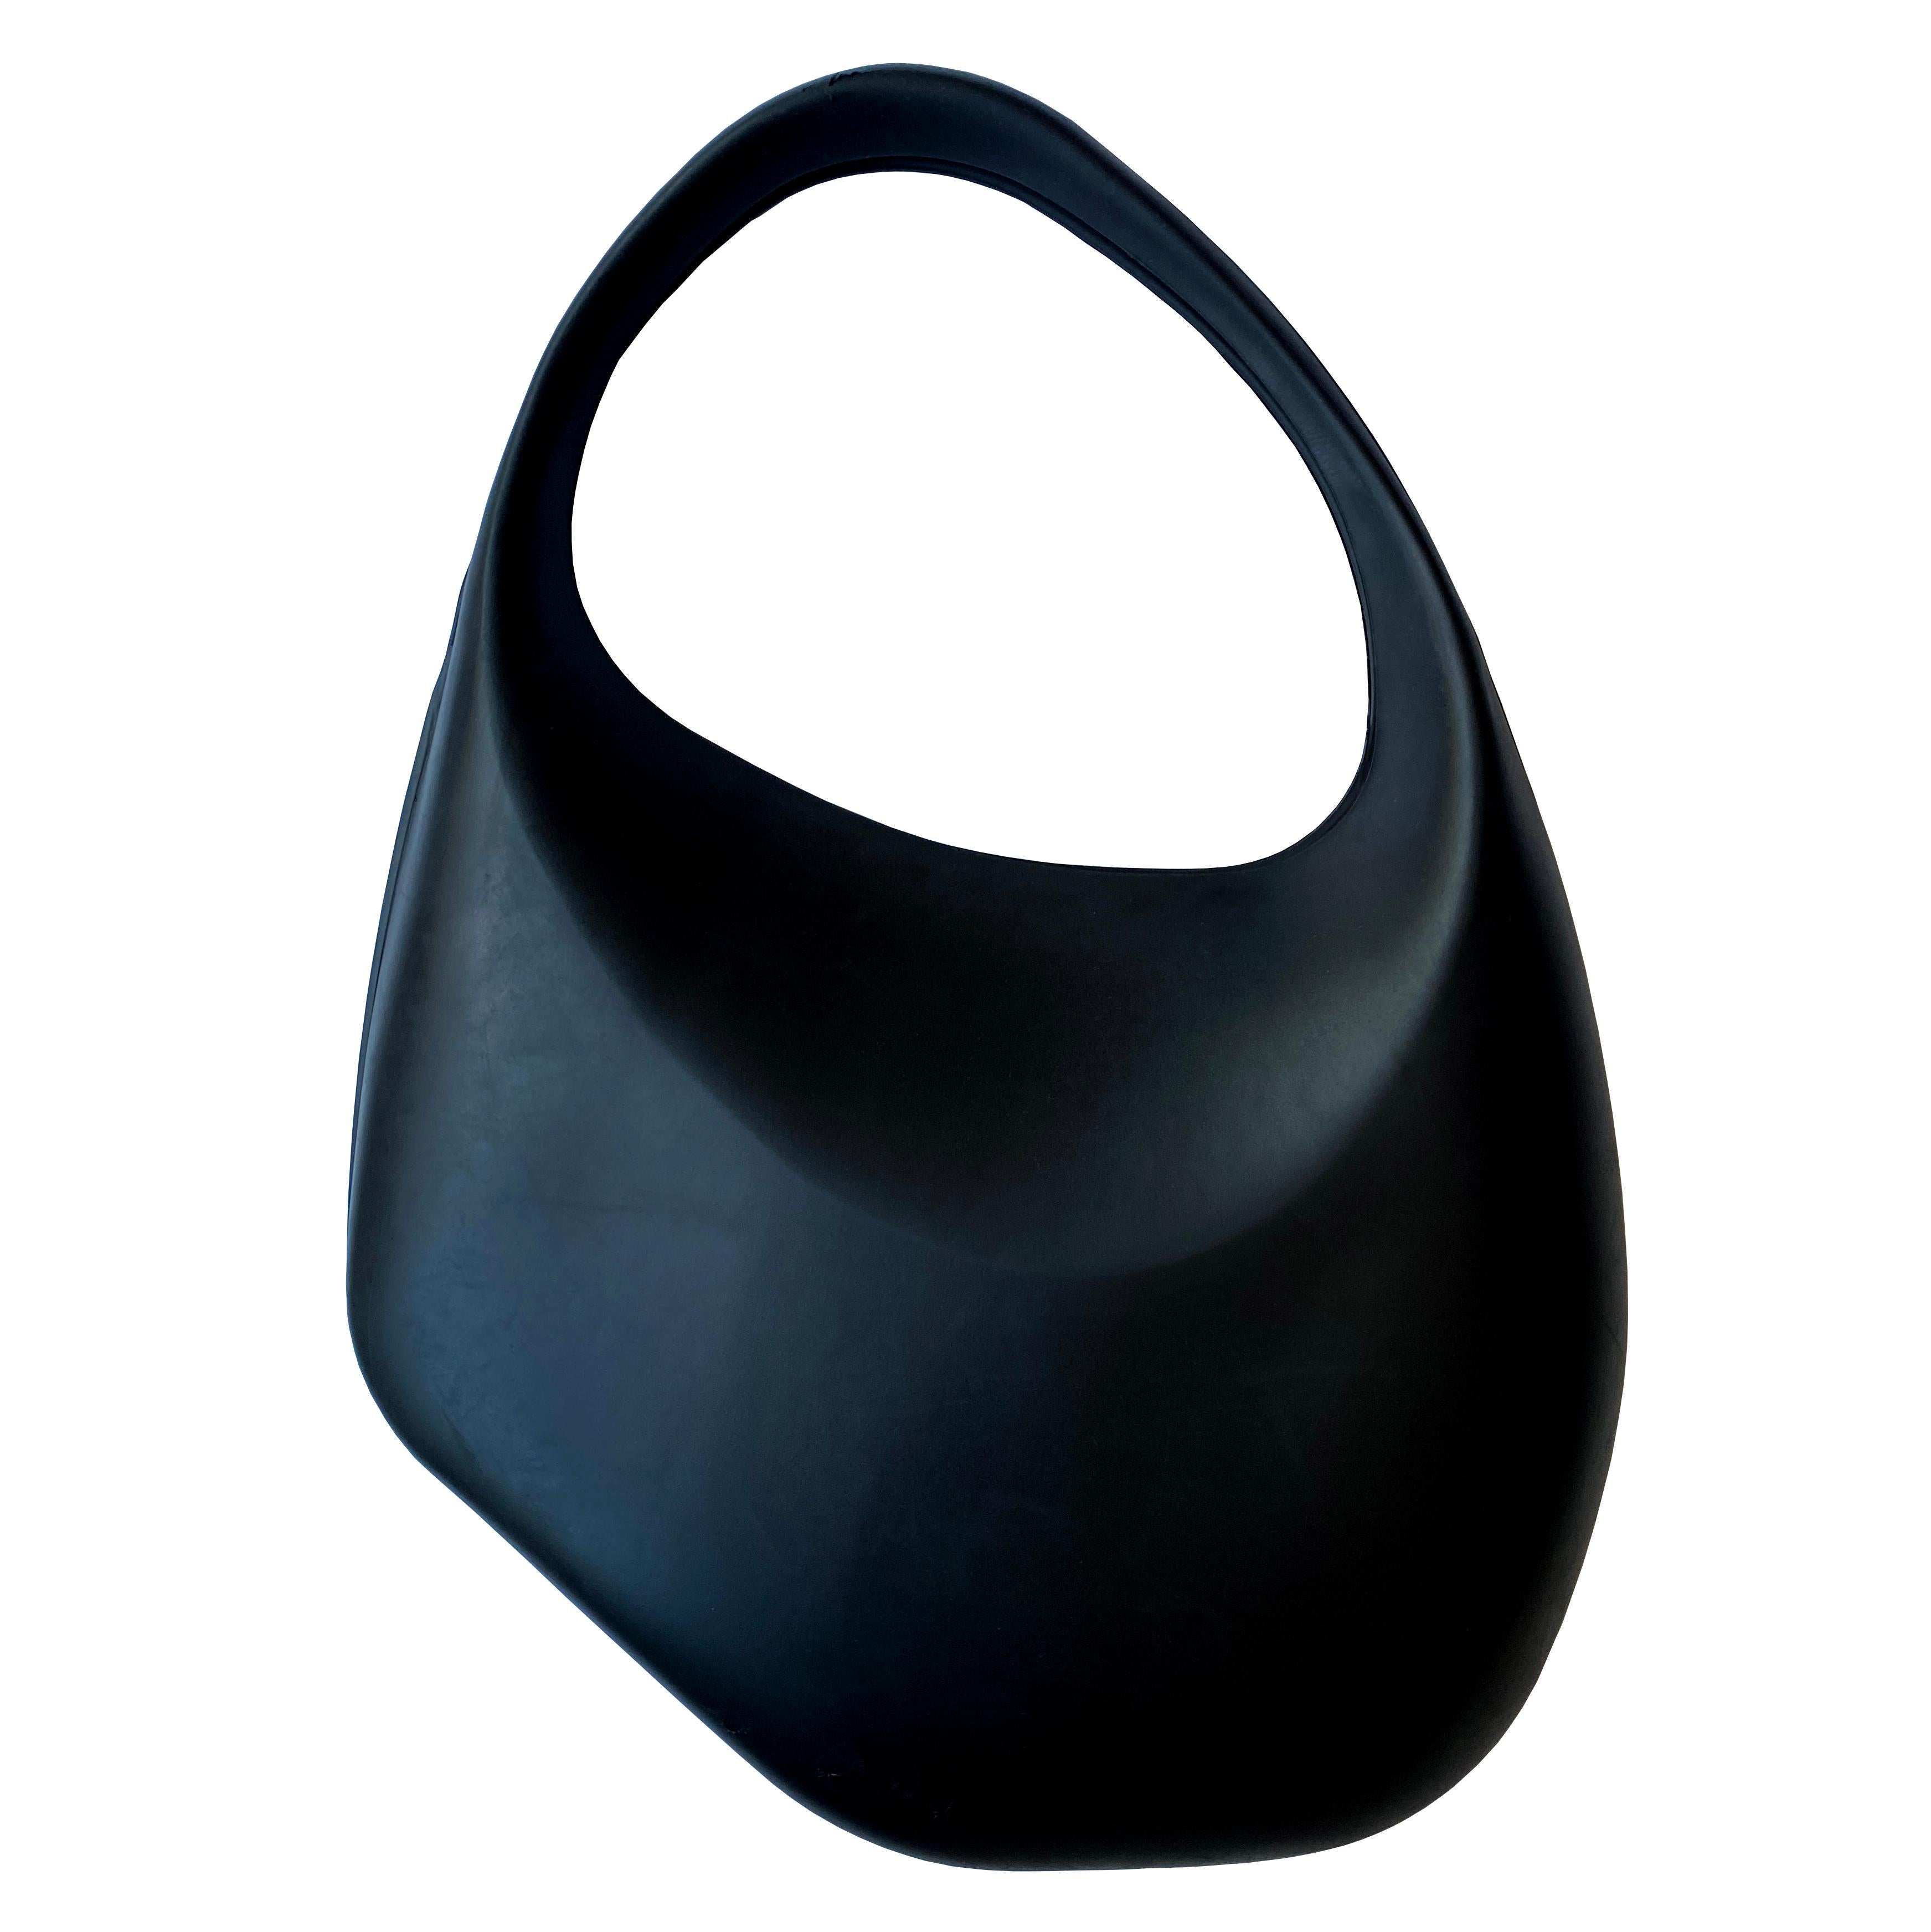 A Thierry Mugler ‘Le Bubble’ Bag, circa 1995-2000. This unique bag has an organic sculptural form, crafted from soft and flexible rubber. The soft rubber construction gives it a distinctive look and feel, setting it apart from traditional handbags.